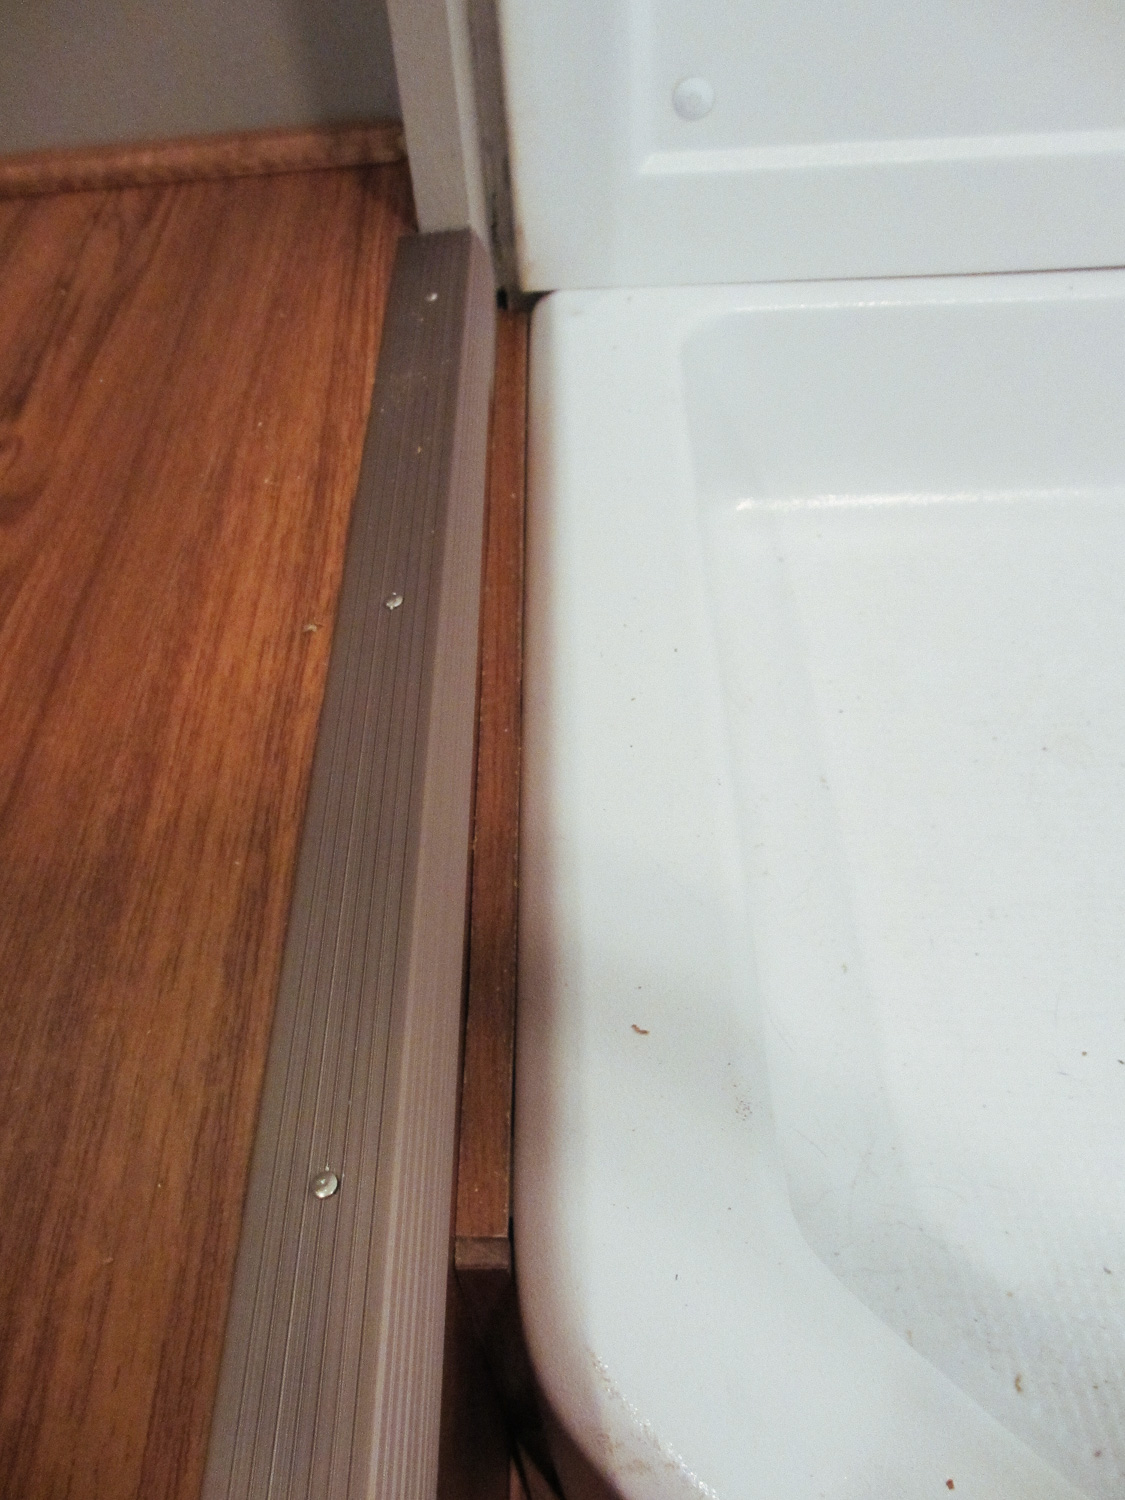  We placed a piece of stair nosing over the edge of the step. The gap between the step and shower was covered with a piece of laminate flooring and silicone caulk. 